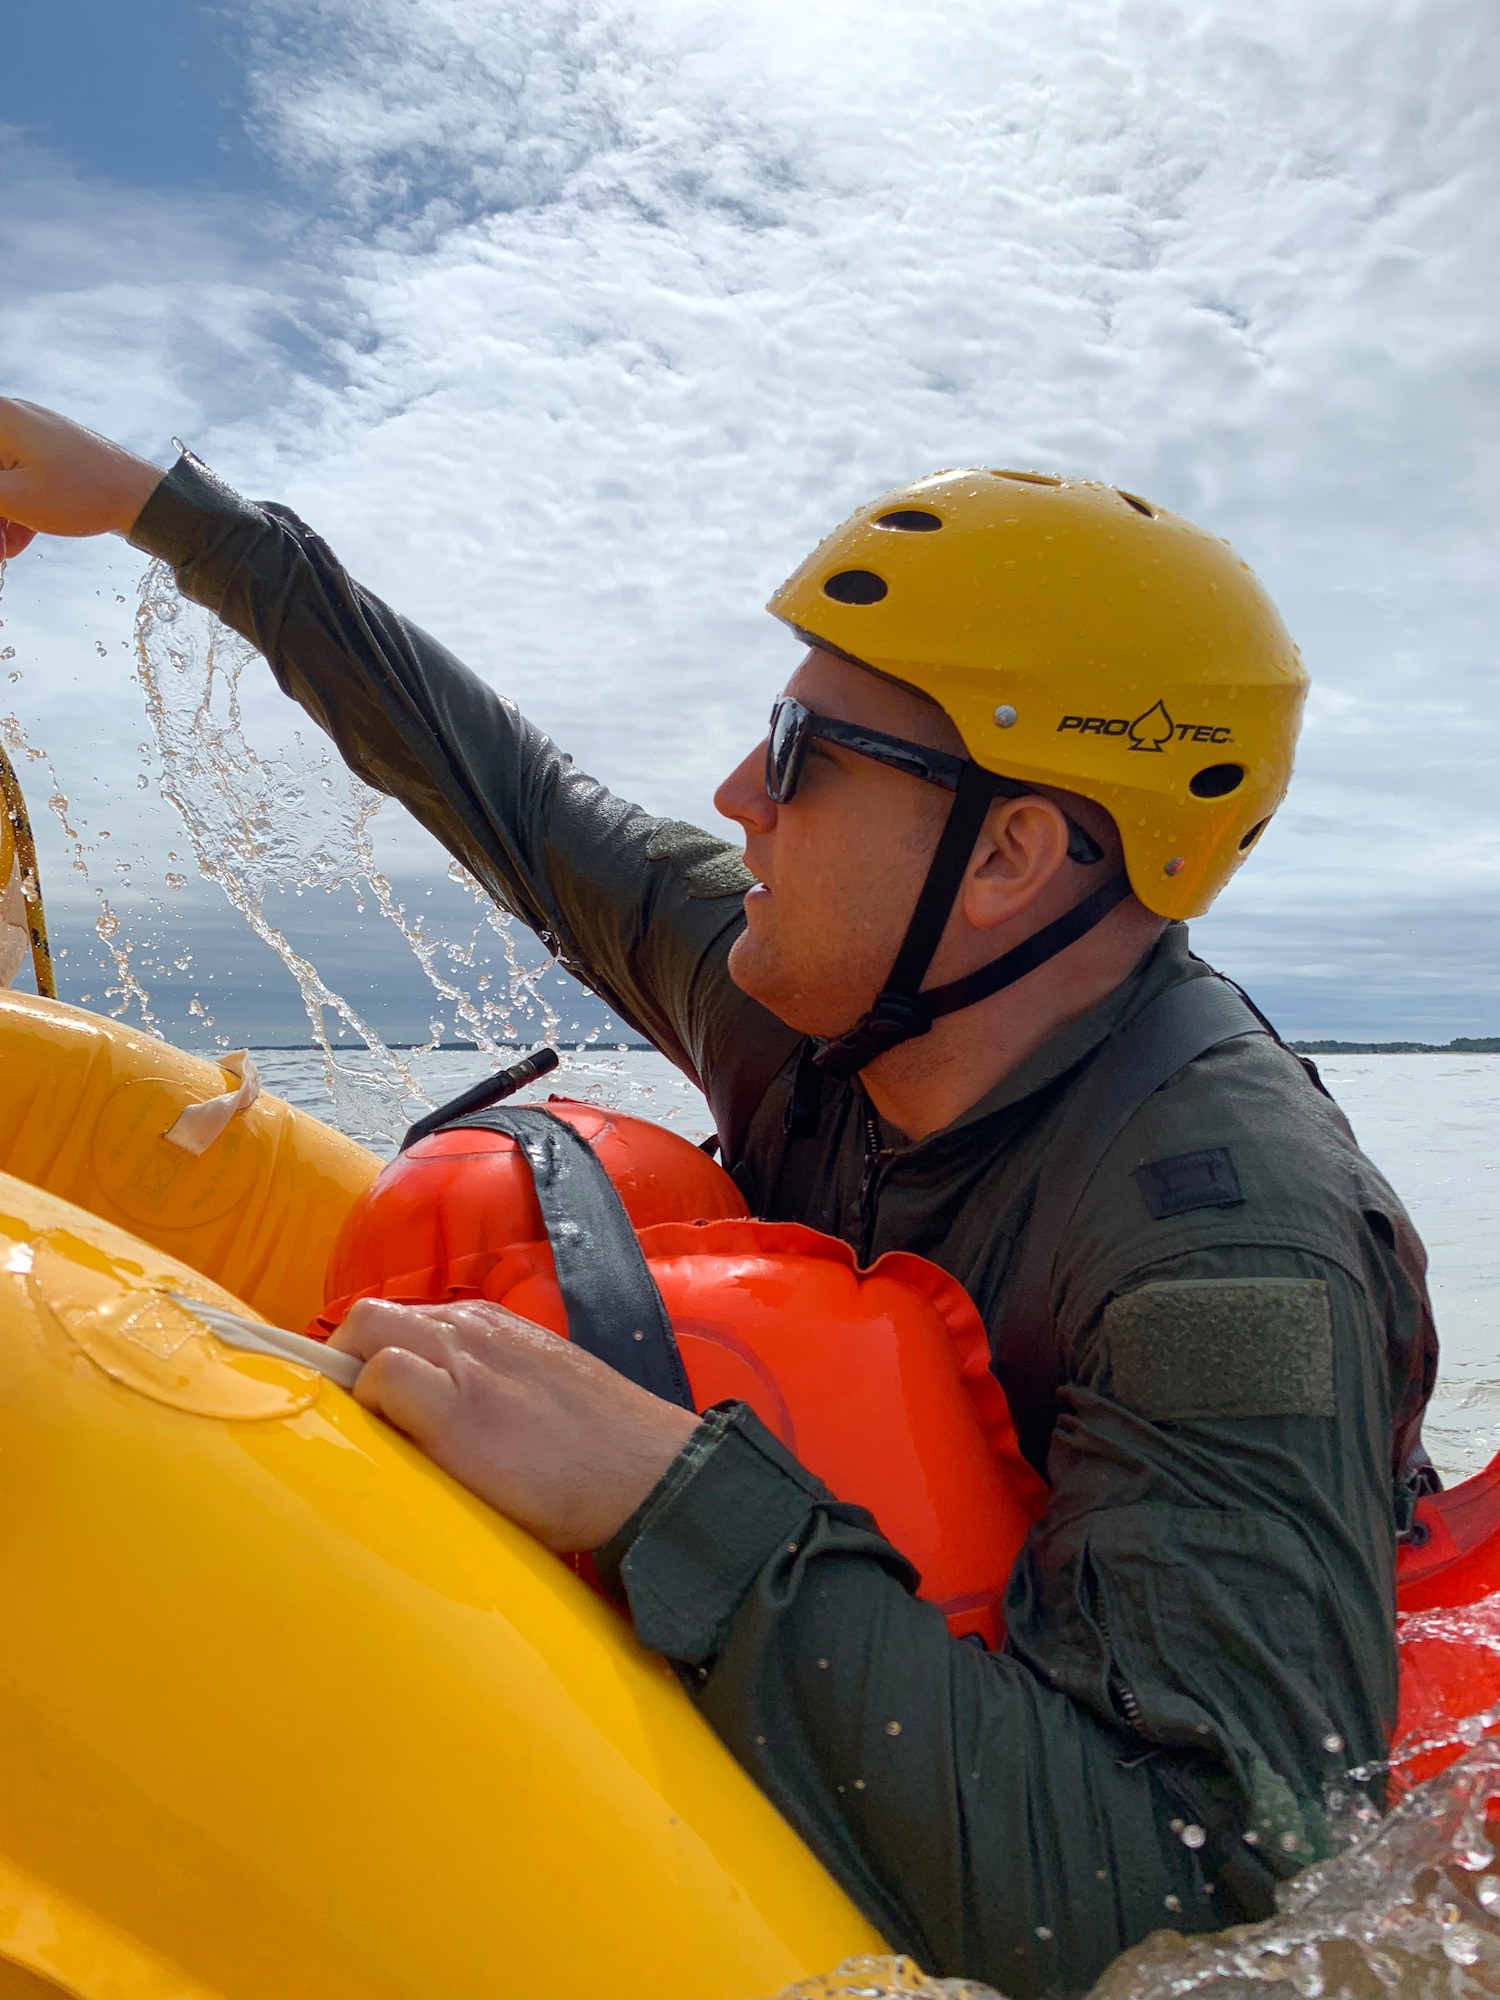 Capt. Alex Lapointe, 337 AS C-17 pilot from Westover Air Reserve Base, climbs into a raft floating in the Atlantic Ocean Sept. 27, 2018, about 200 yards from the coast of Bowers Beach, Del. The practical application of the water survival training is accomplished after several classroom training sessions.